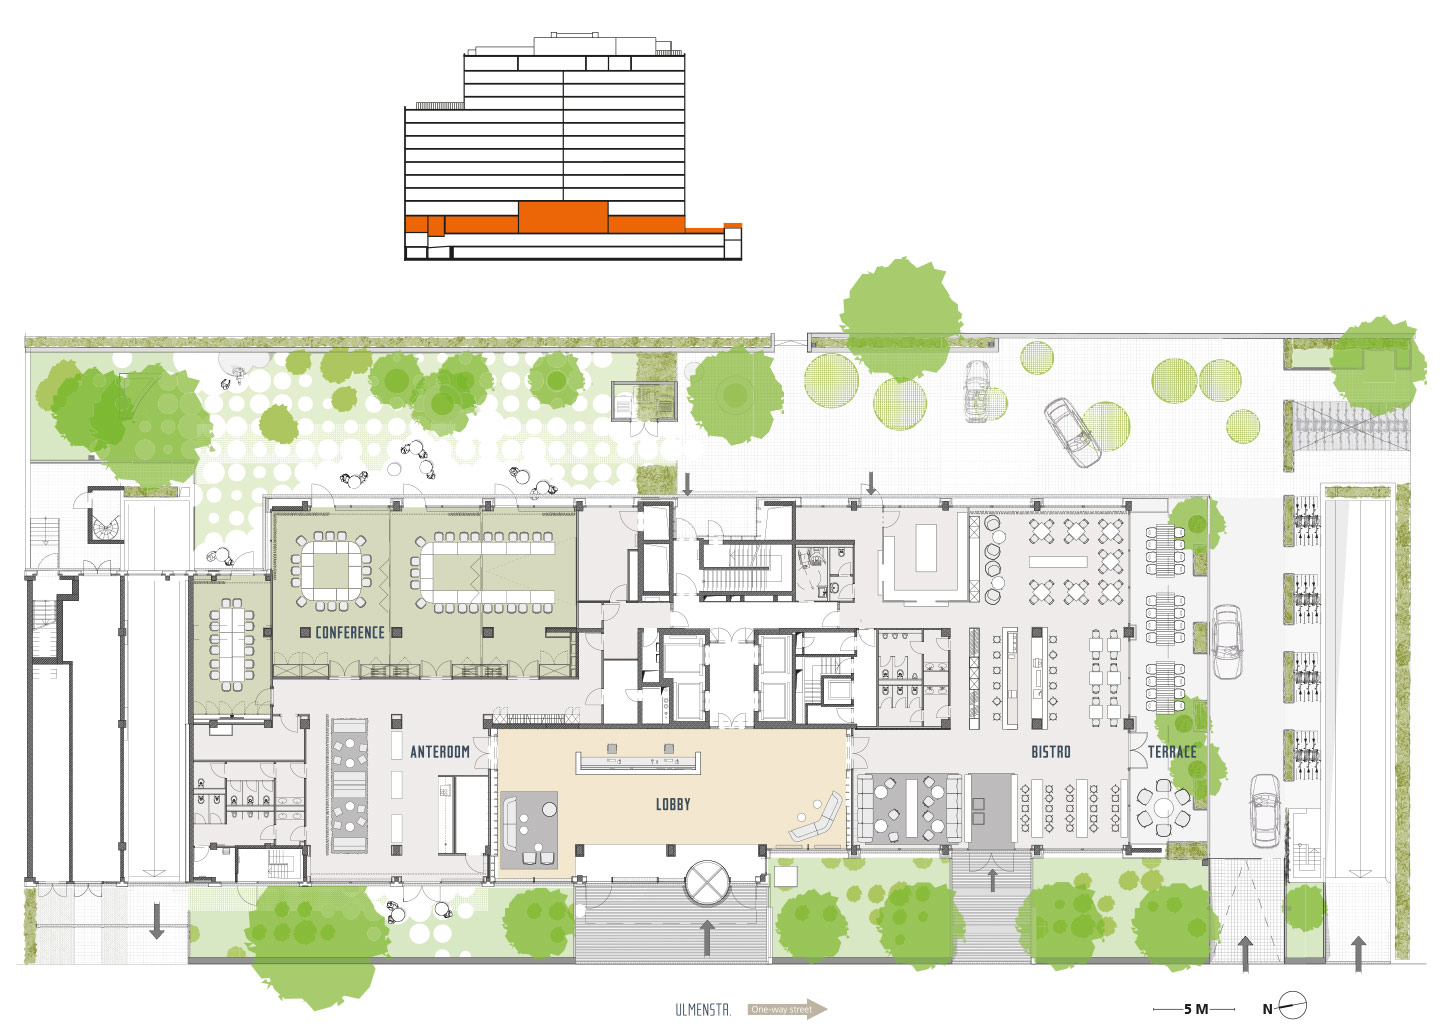 Example of conference area, lobby, bistro with outside terrace*, *All floor plans are indicative preliminary designs.